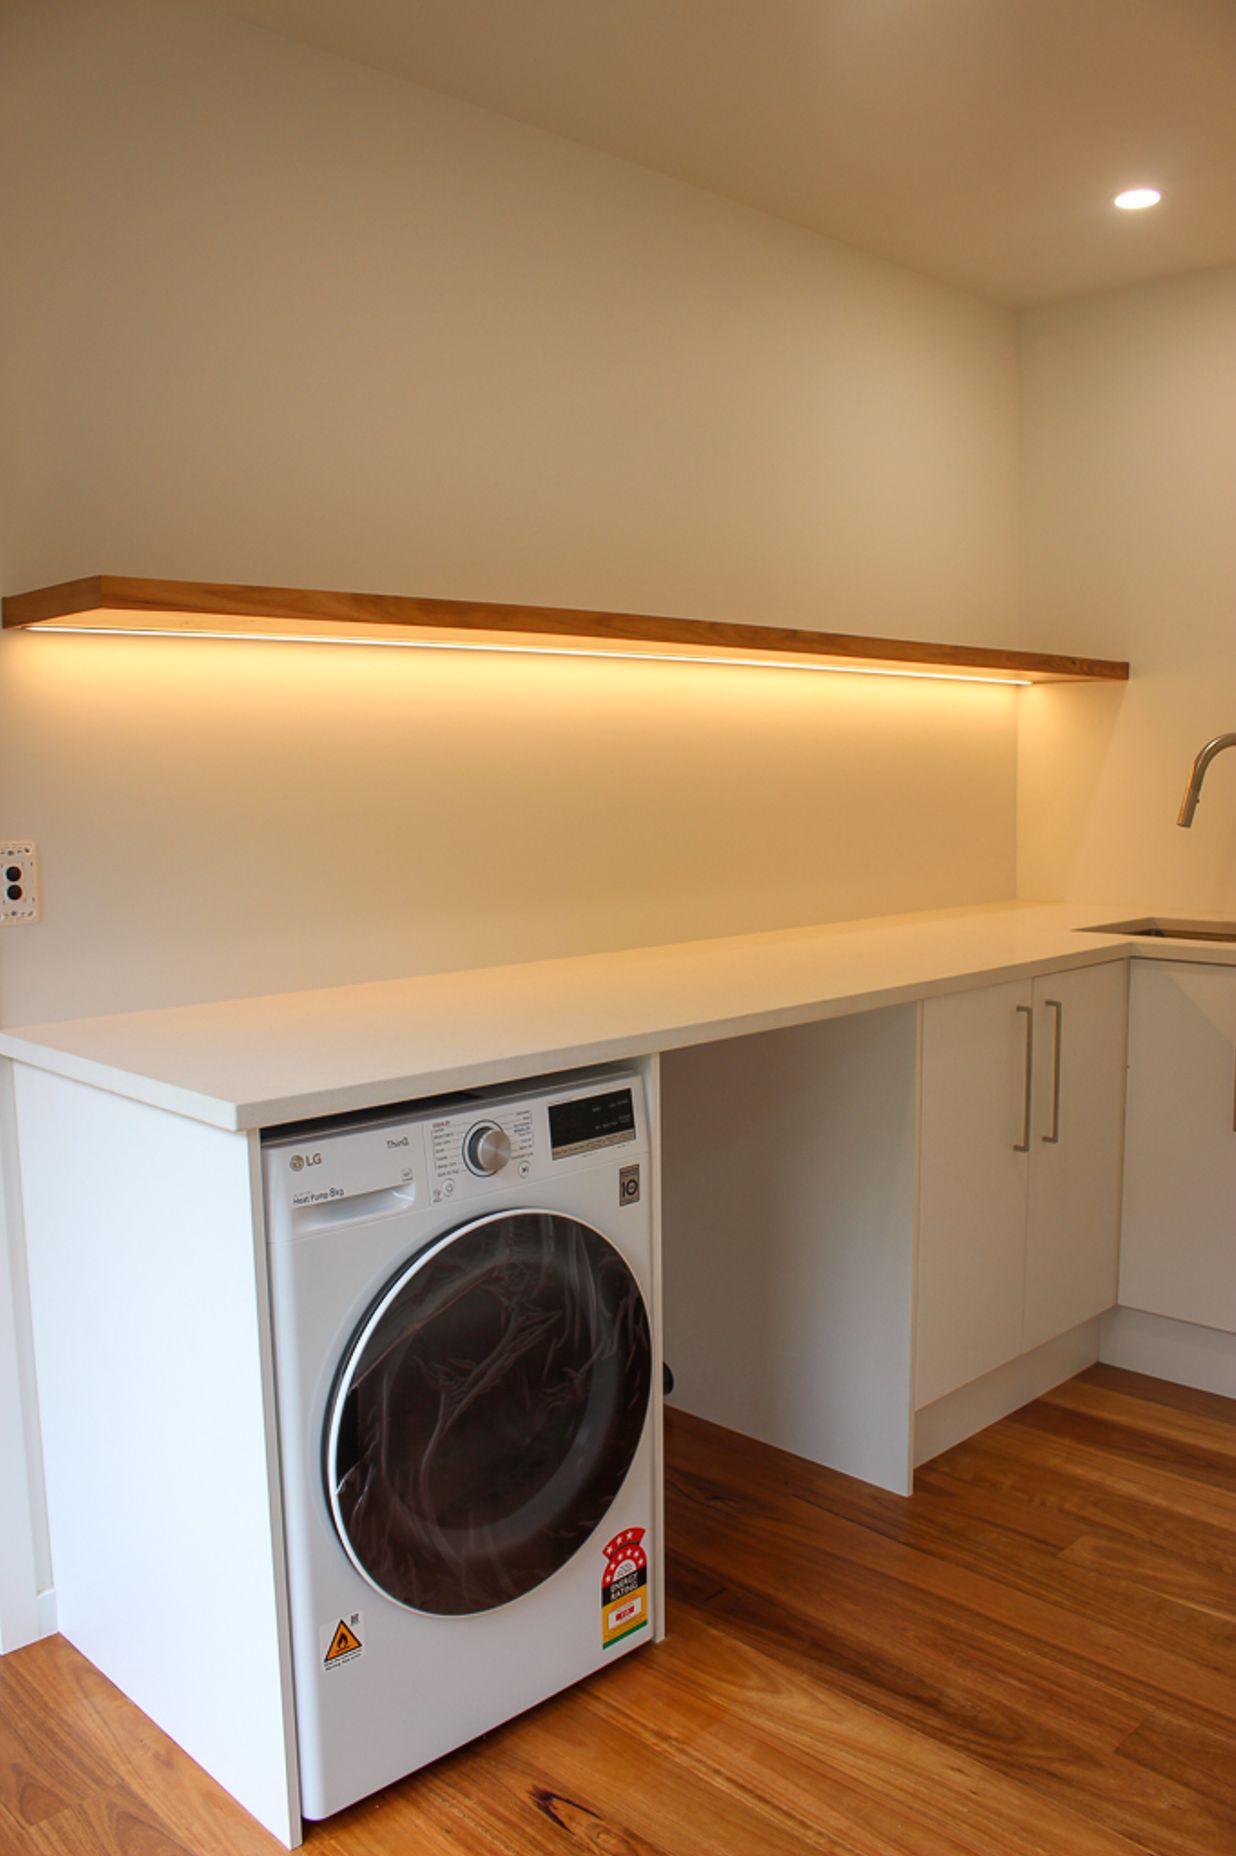 Blackbutt (Pilularis) timber overlay on the floors and the custom built floating shelf give this functional laundry a high-end &amp; luxurious feel.  Keeping on top of the all laundry for a growing and busy family needn't be a chore with a space like this